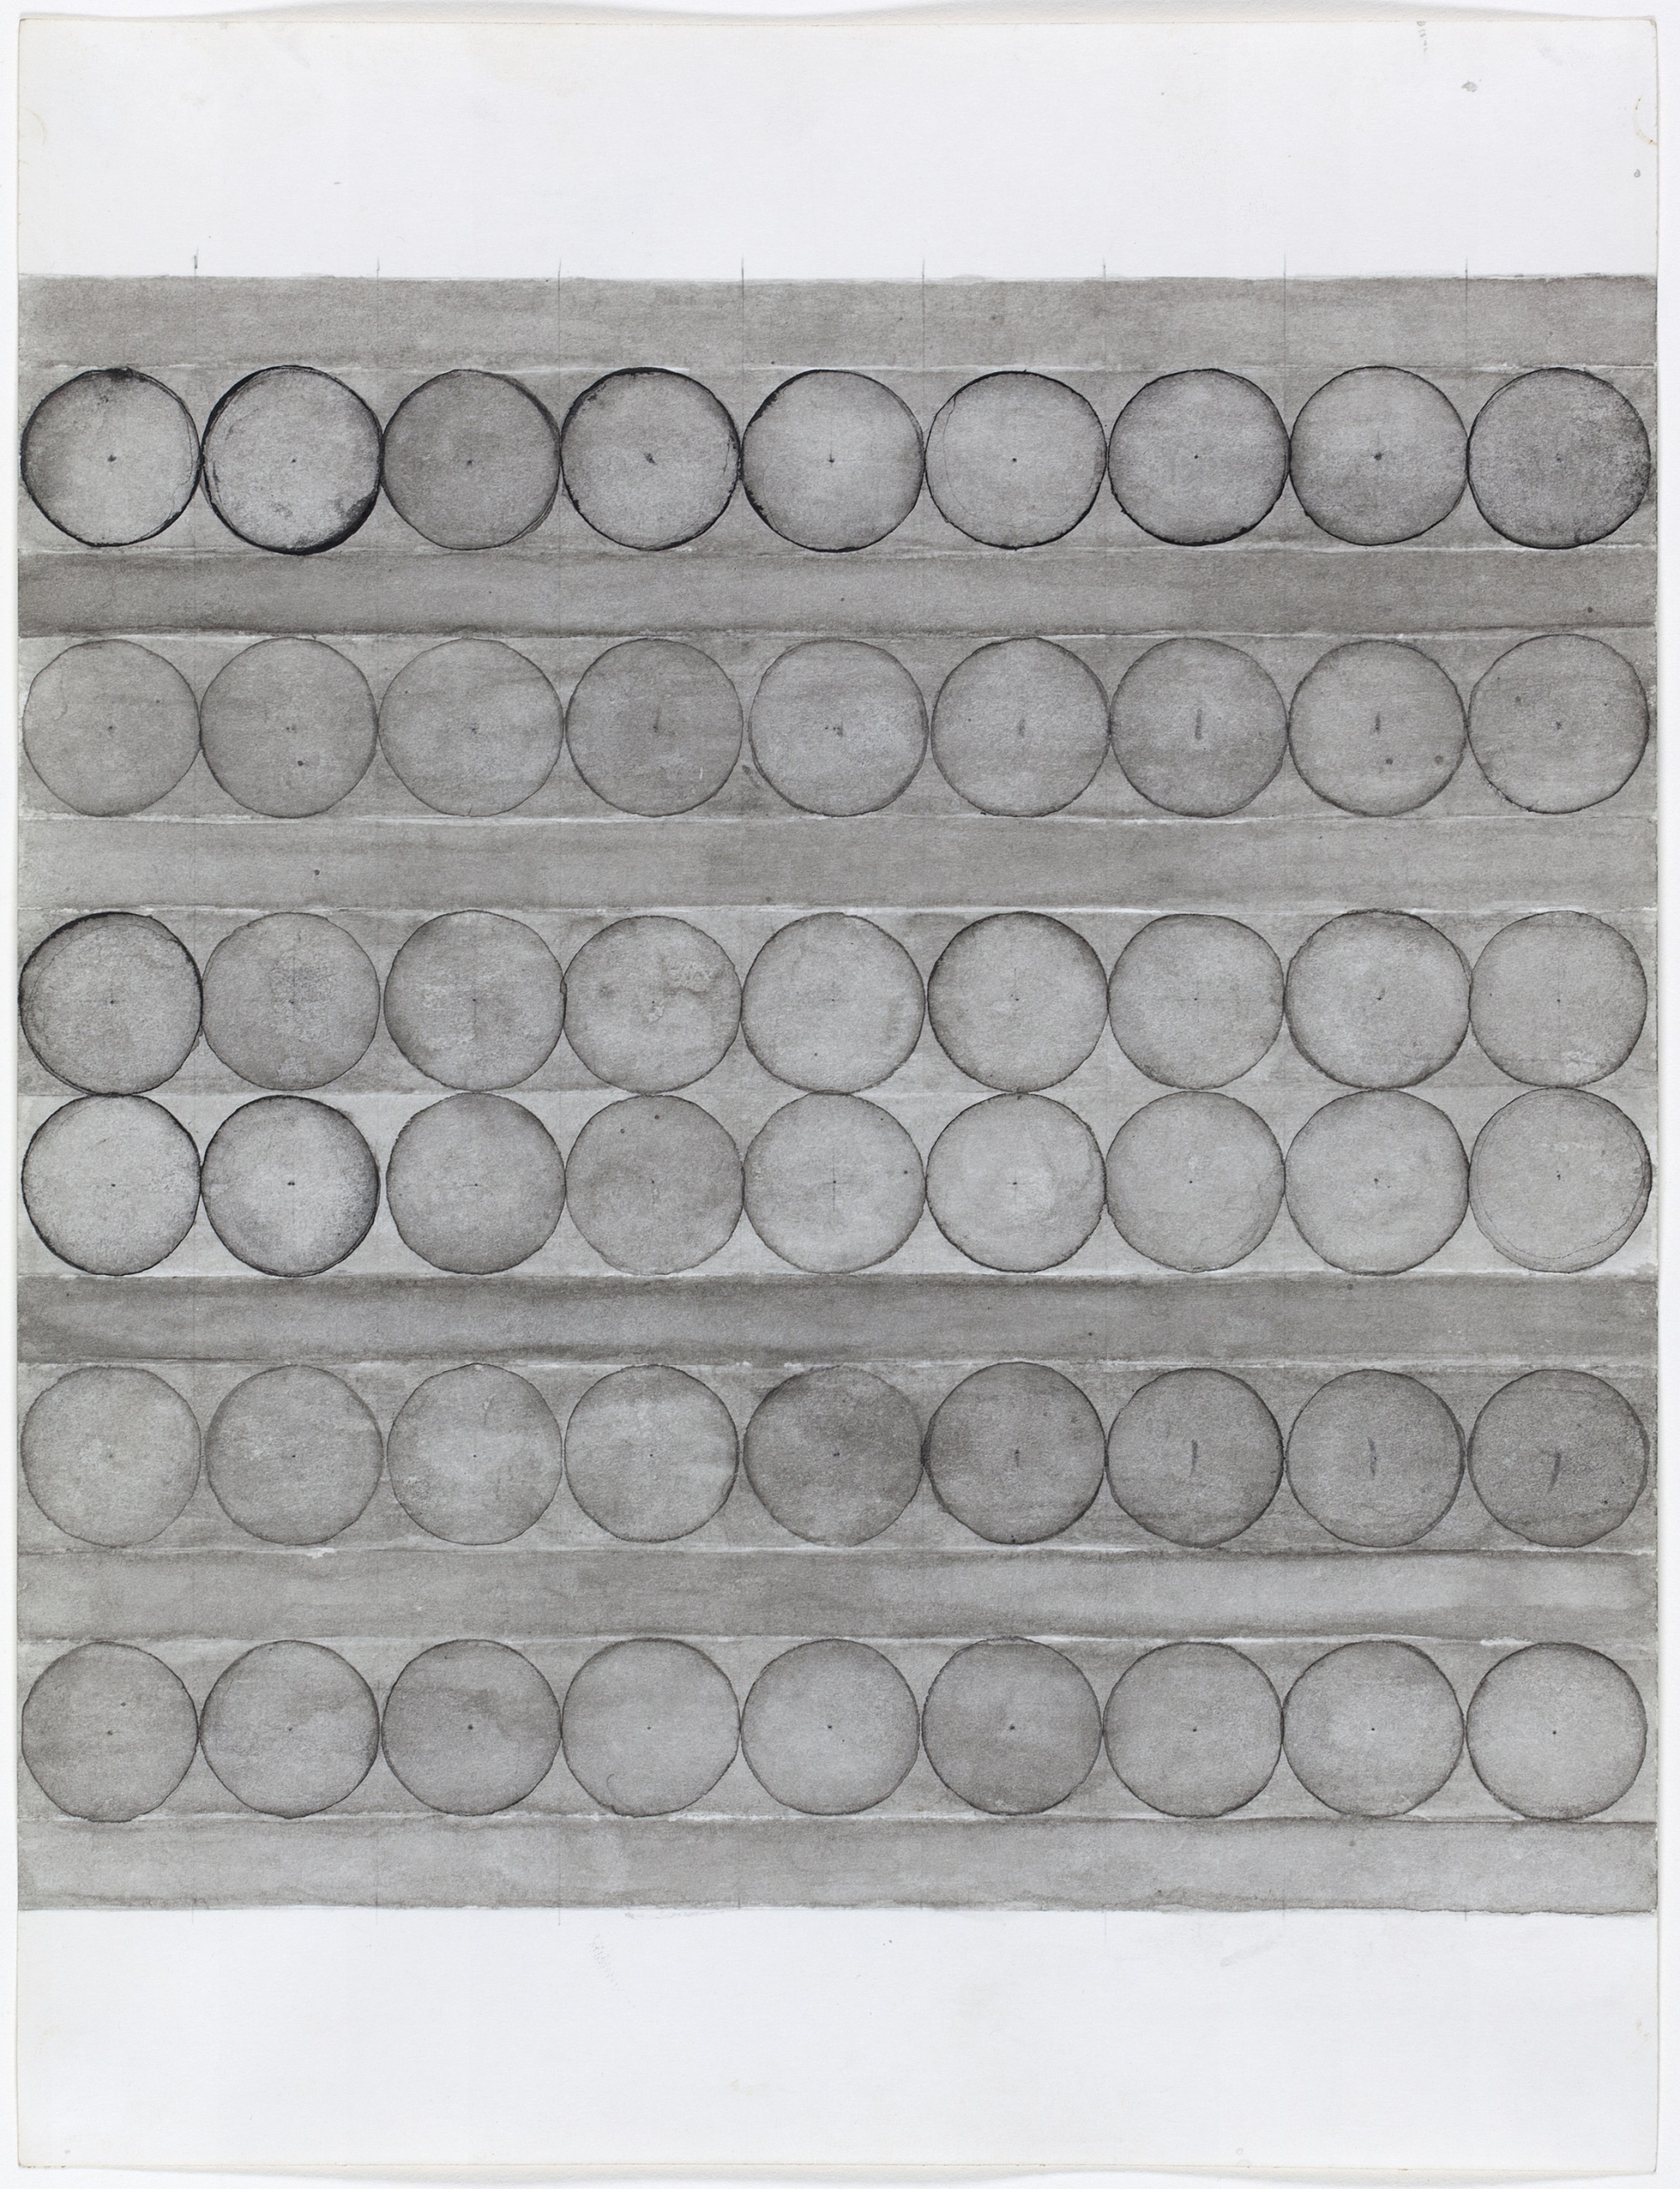 Eva Hesse, No Title c. 1965-1966. Watercolor and ink on paper 12 x 9 inches (30.5 x 22.9cm) © The Estate of Eva Hesse Courtesy Hauser & Wirth